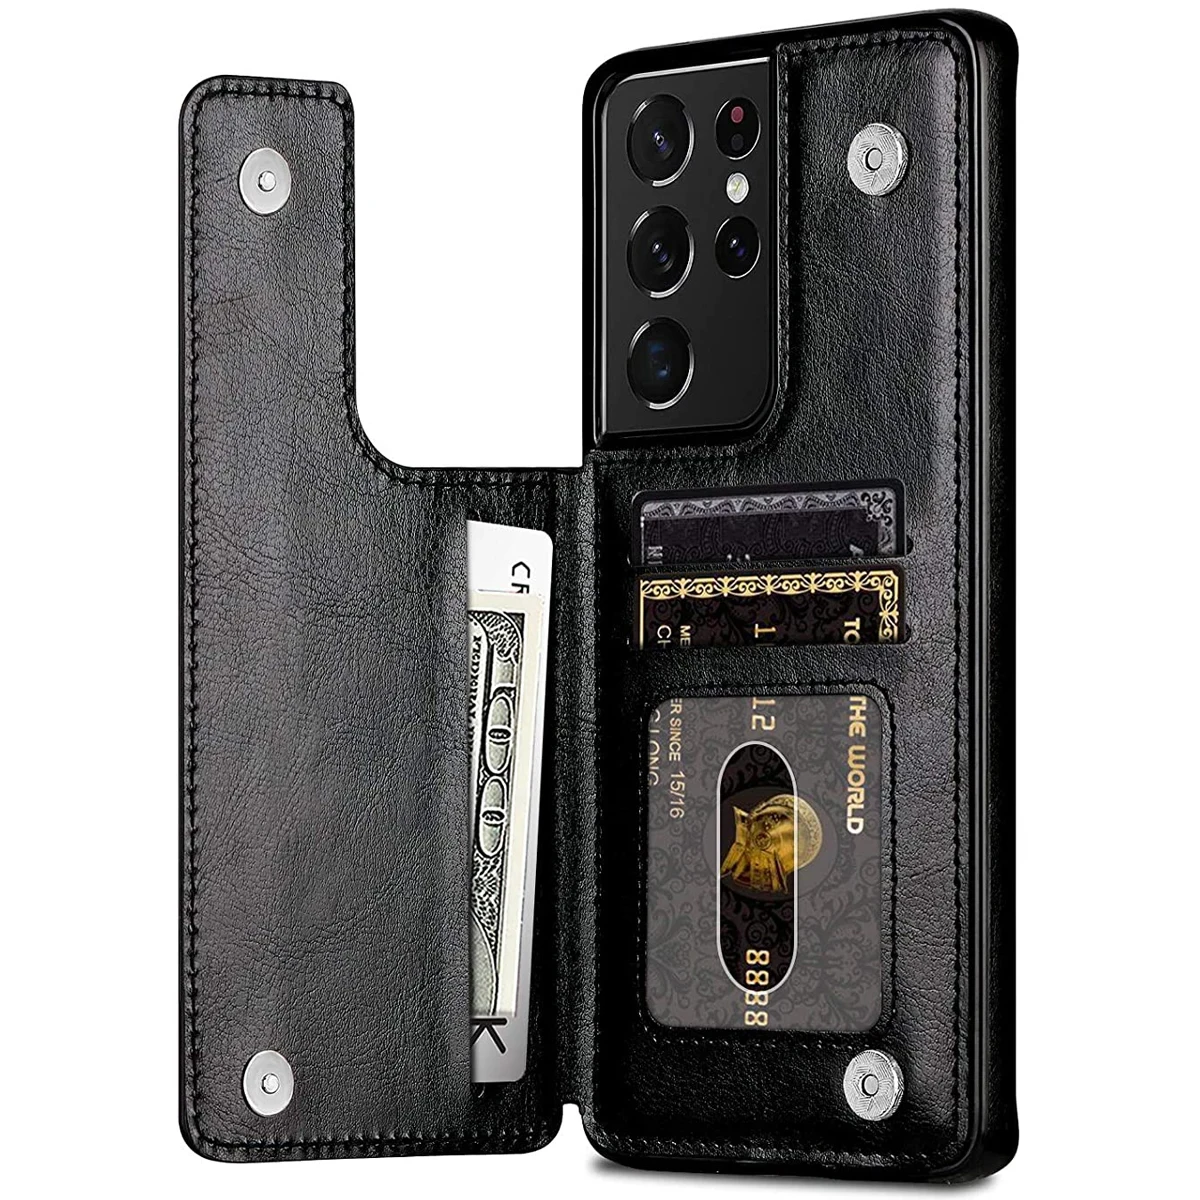 For Samsung Galaxy S21 Ultra /S21+ /S21 5G Wallet Case,WEFOR Luxury Slim Fit Premium Leather Card Slots Shockproof Flip Shell